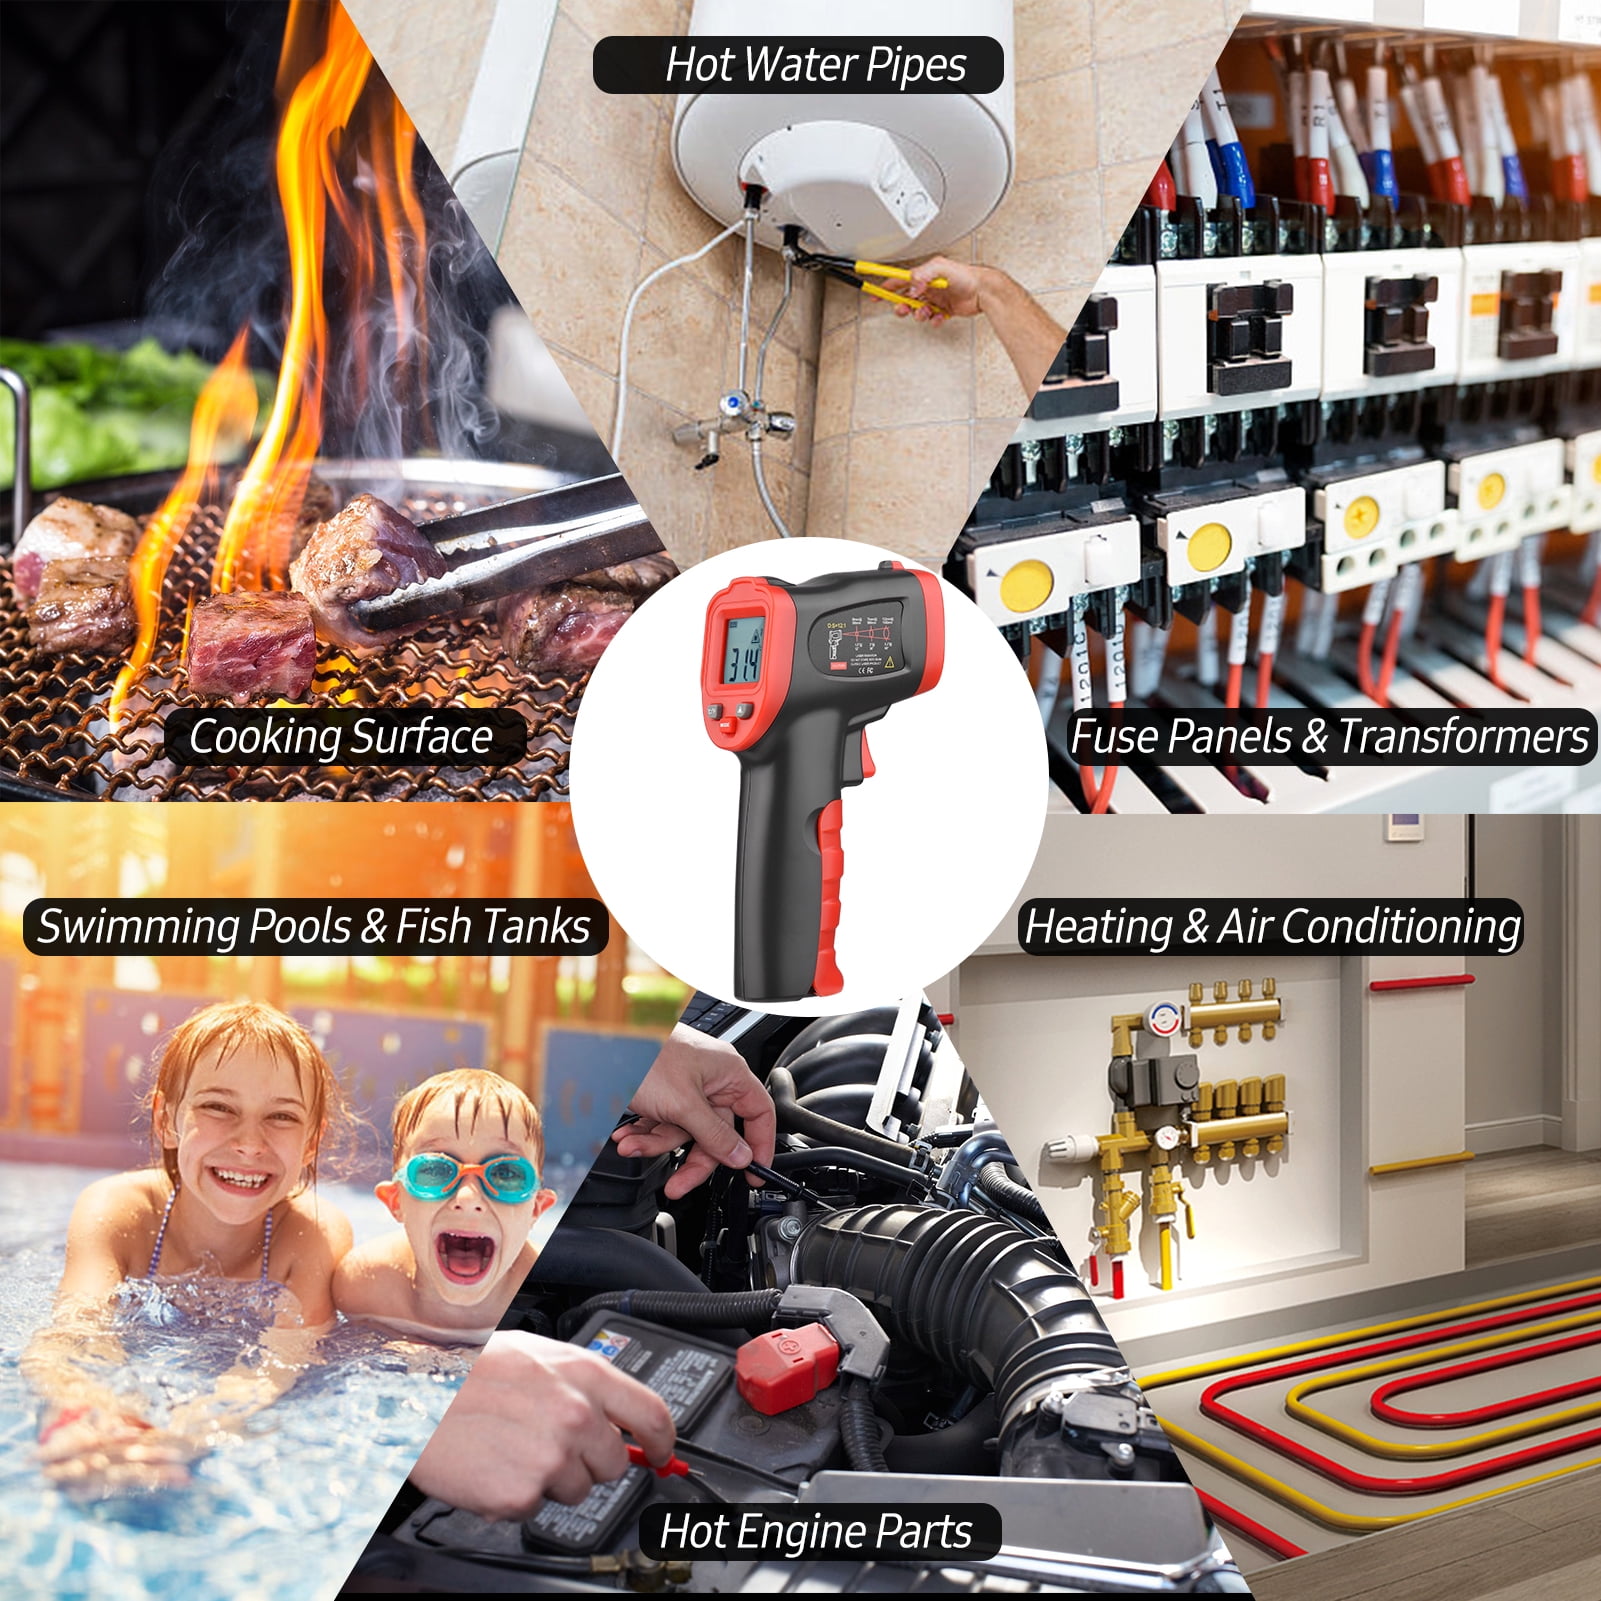 50400 /-58752 Colorful Screen Infrared Thermometer IR Laser Thermometer  Handheld Non-Contact Digital Temperature Tester Pyrometer Temperature Gun  for Kitchen Cooking BBQ Chocolate Pizza 